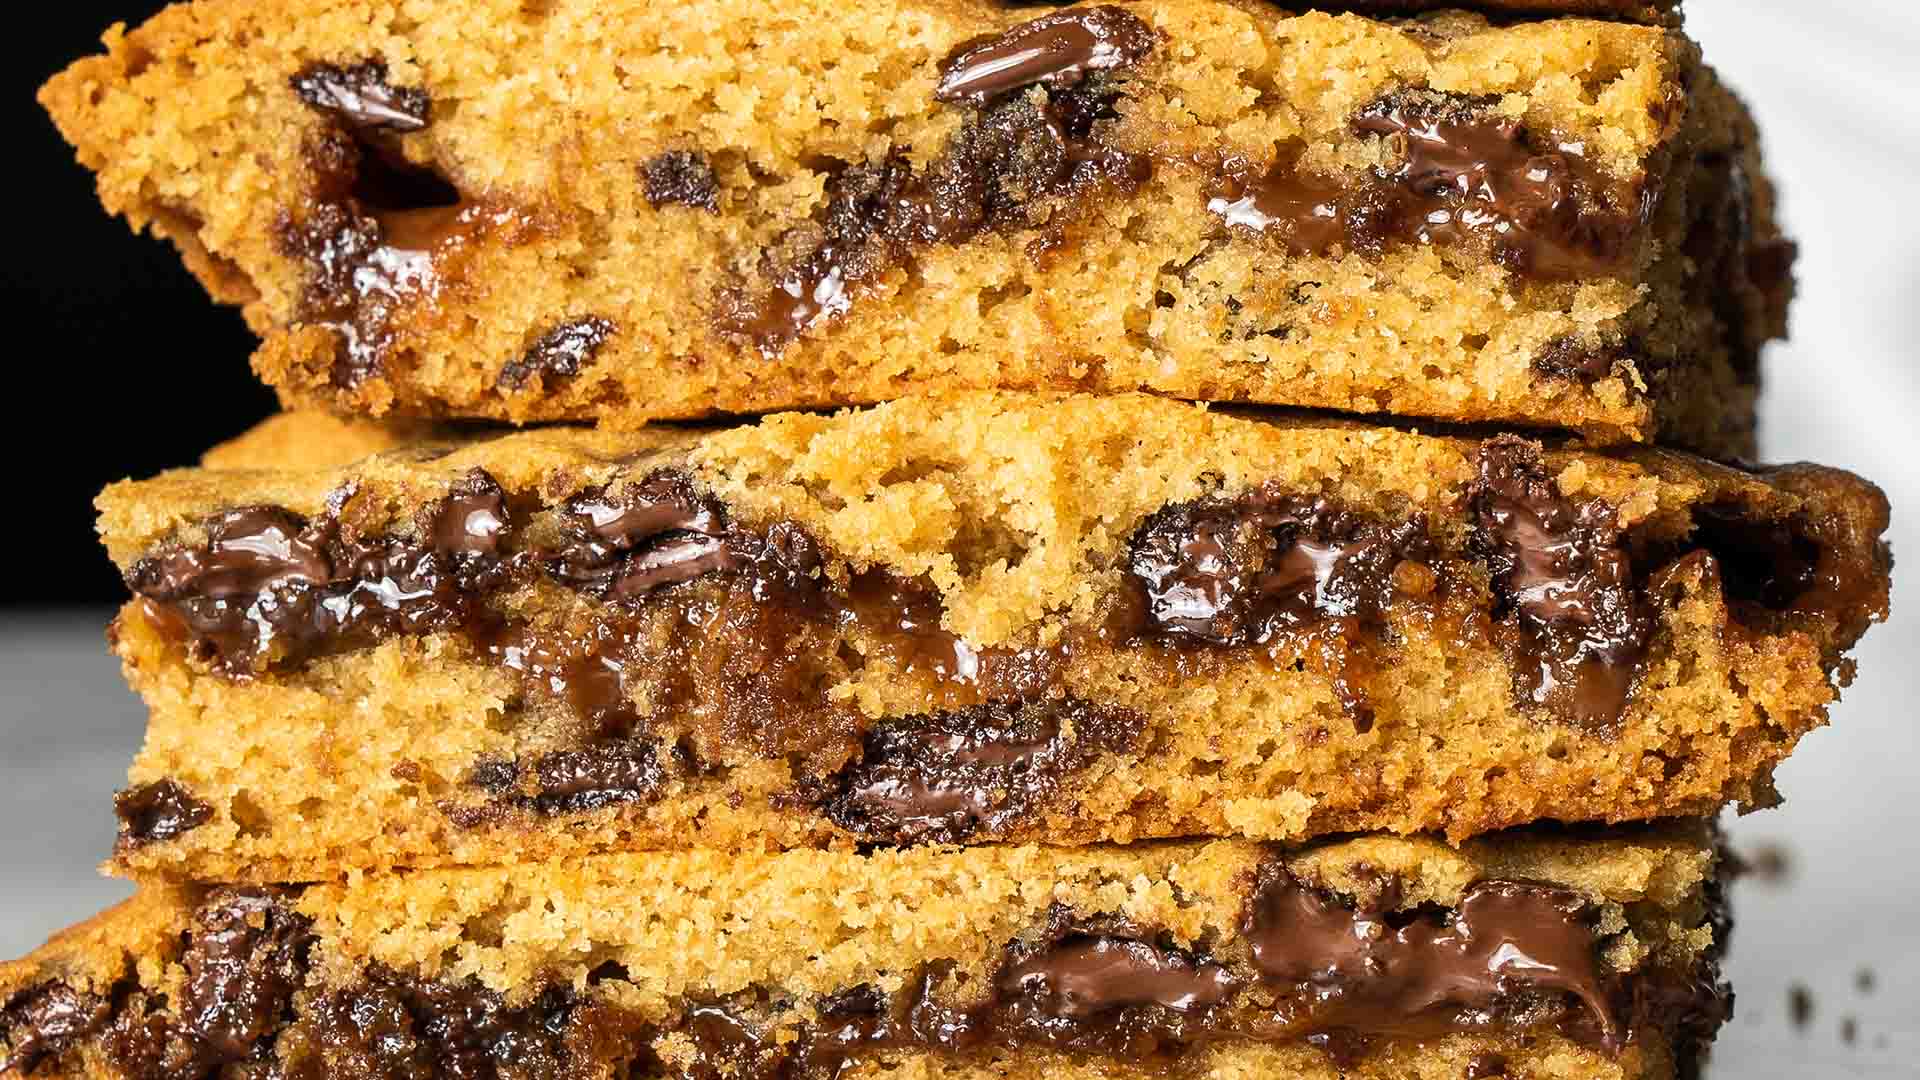 Gelato Messina Is Releasing a Dulce de Leche Version of Its Indulgent Choc Chip Cookie Pie